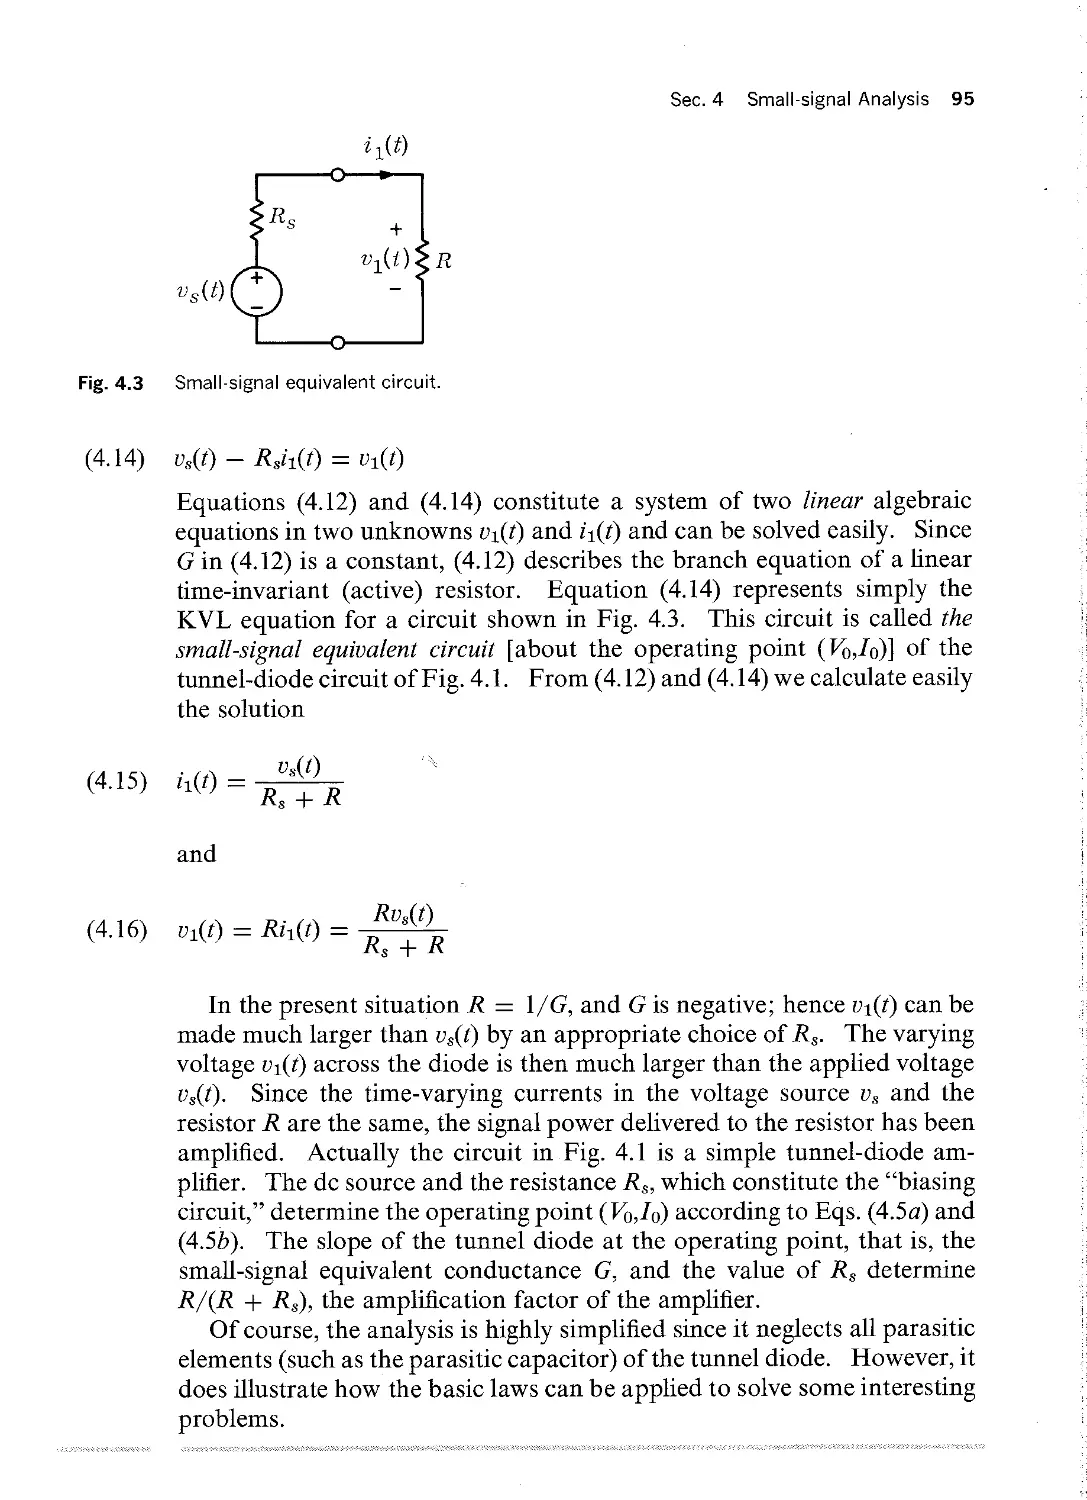 4.3 - Networks Functions and Sinusoidal Steady State